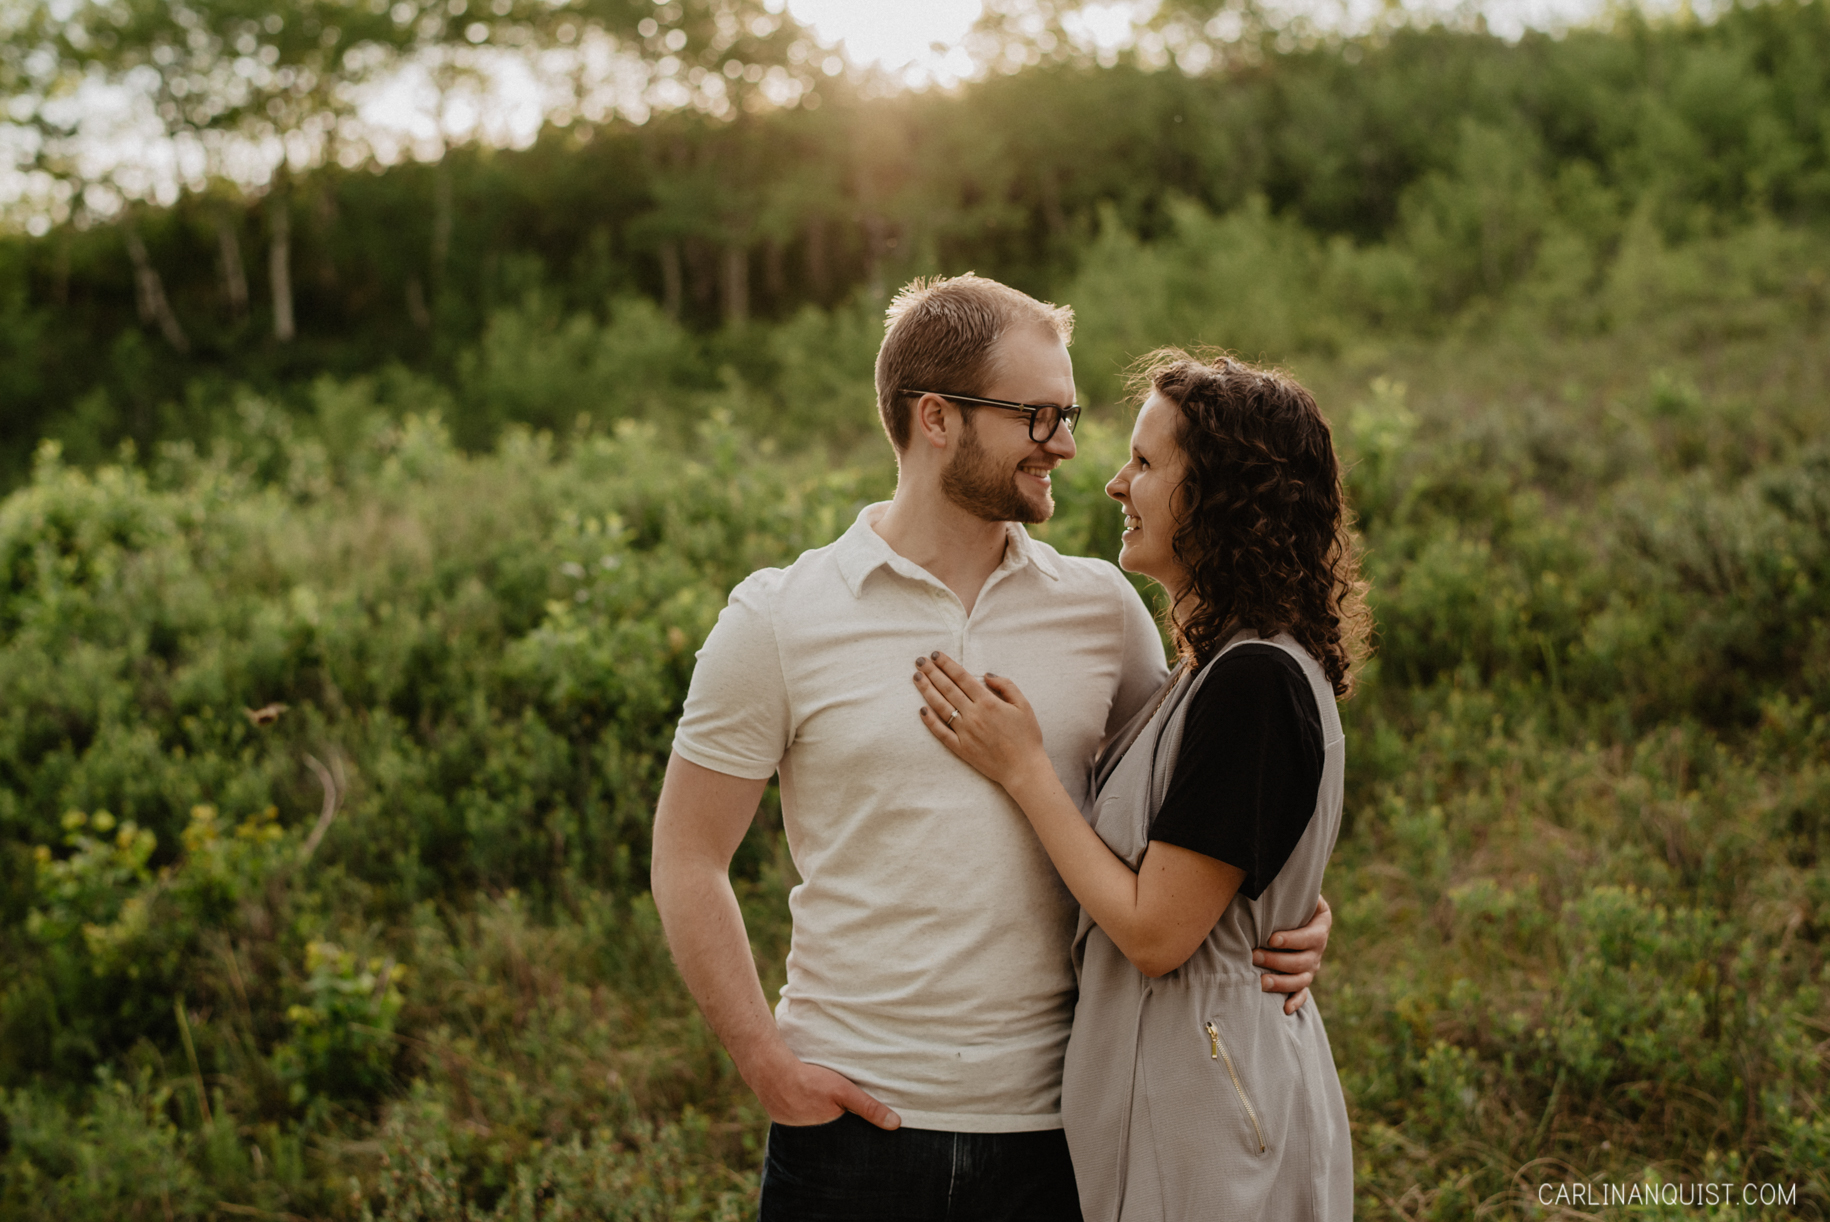 Romantic Engagement Photography at Glenbow Ranch Provincial Park